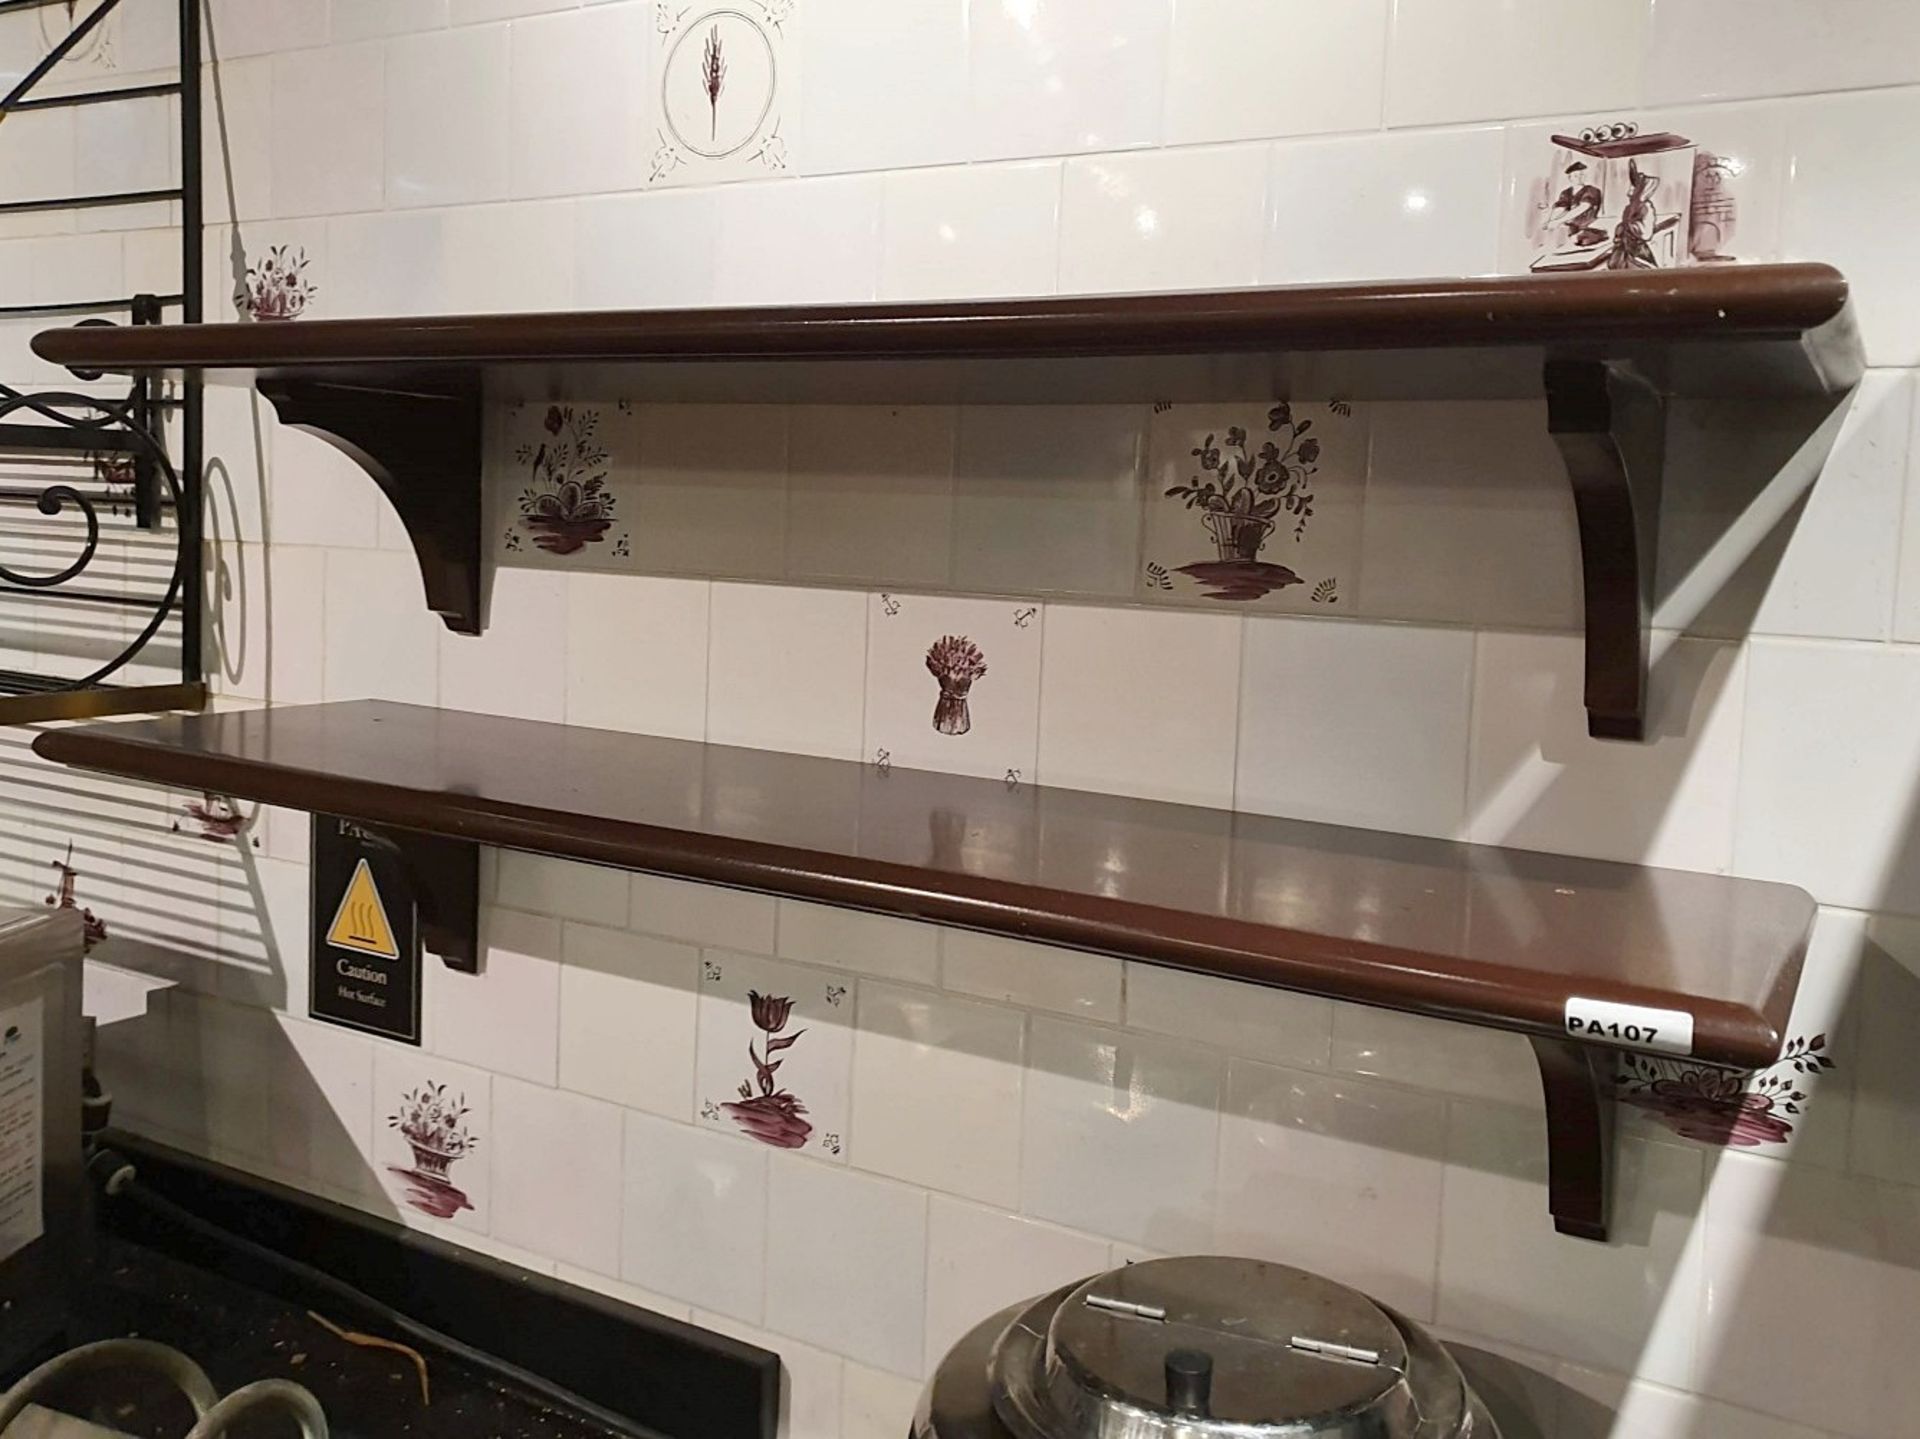 2 x Wall Mounted Wooden Shelves - W120 x D30 cms - Ref PA107 - CL463 - Location: Altrincham WA14 - Image 3 of 3